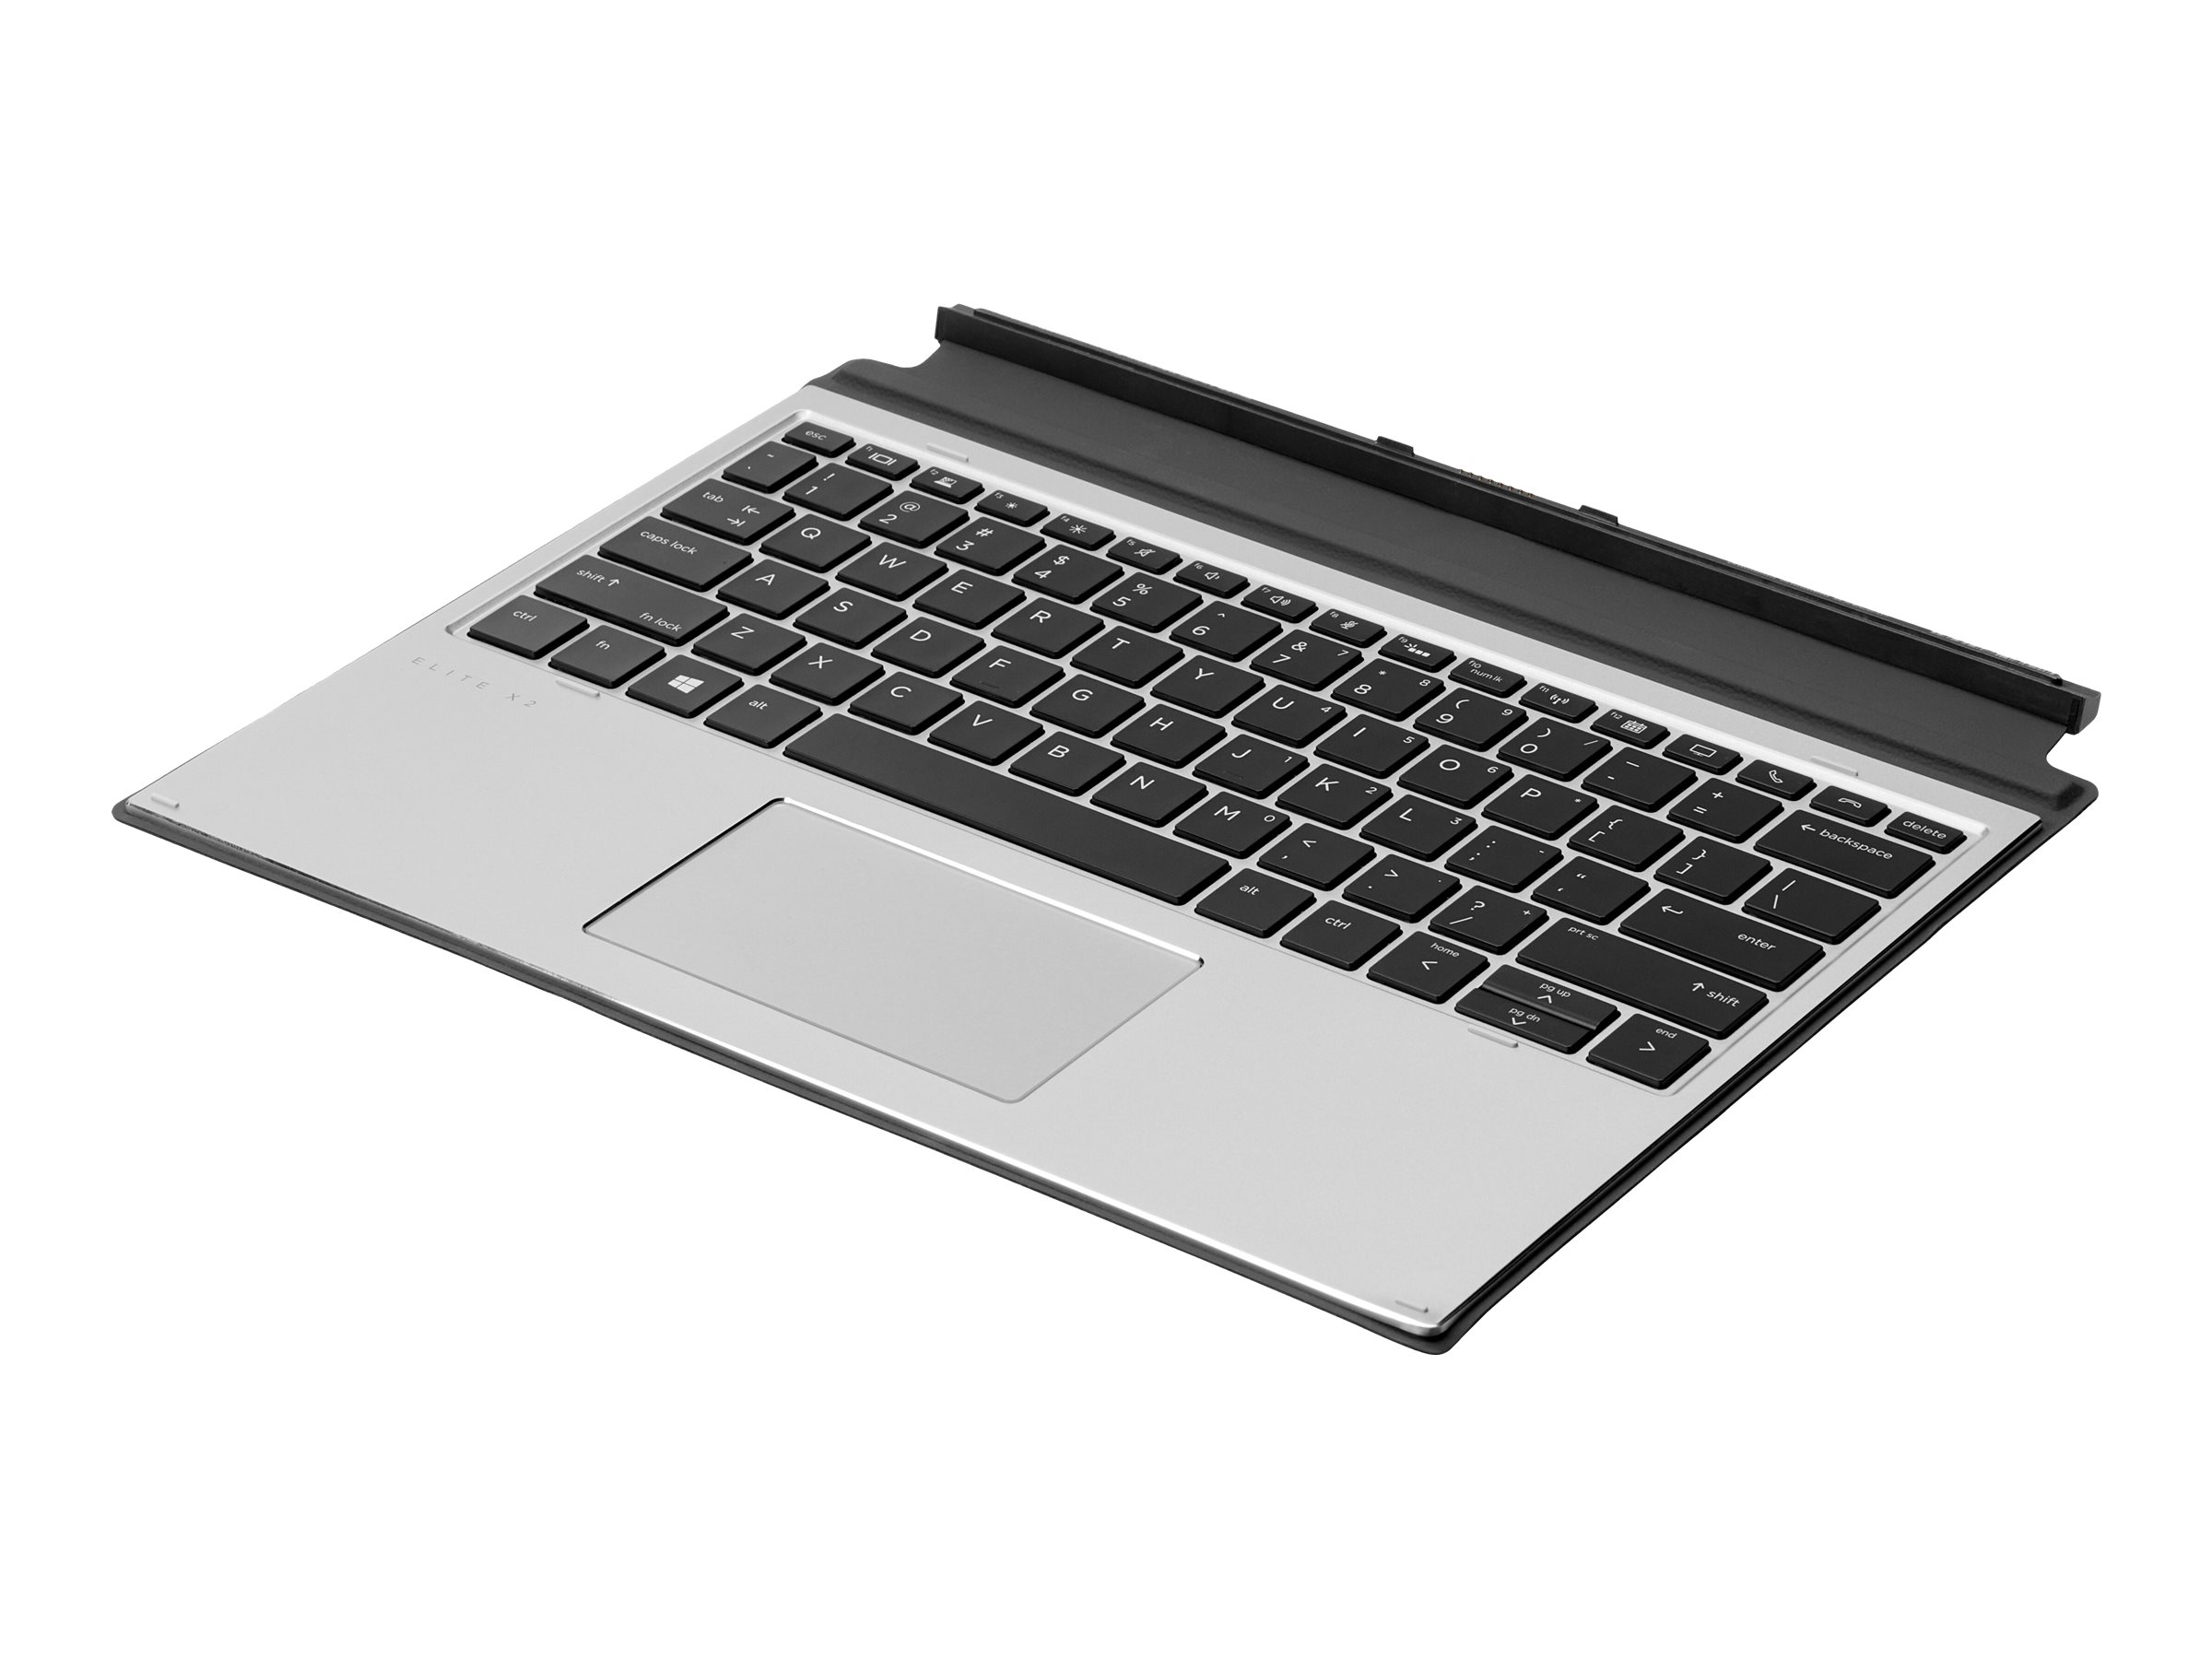 EliteOne 800 G4 23.8-inch Touch GPU All-in-One PC